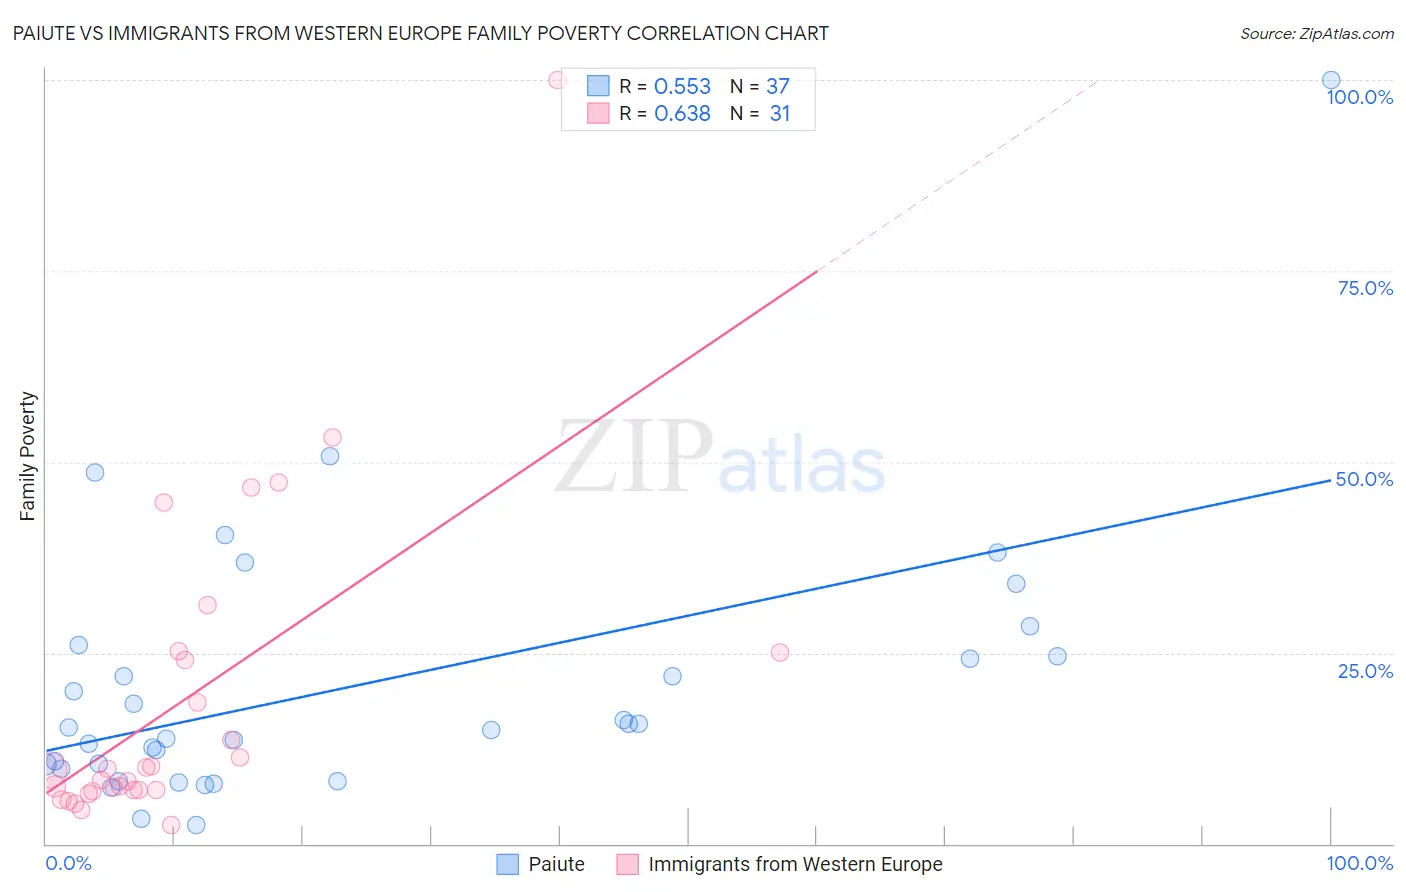 Paiute vs Immigrants from Western Europe Family Poverty